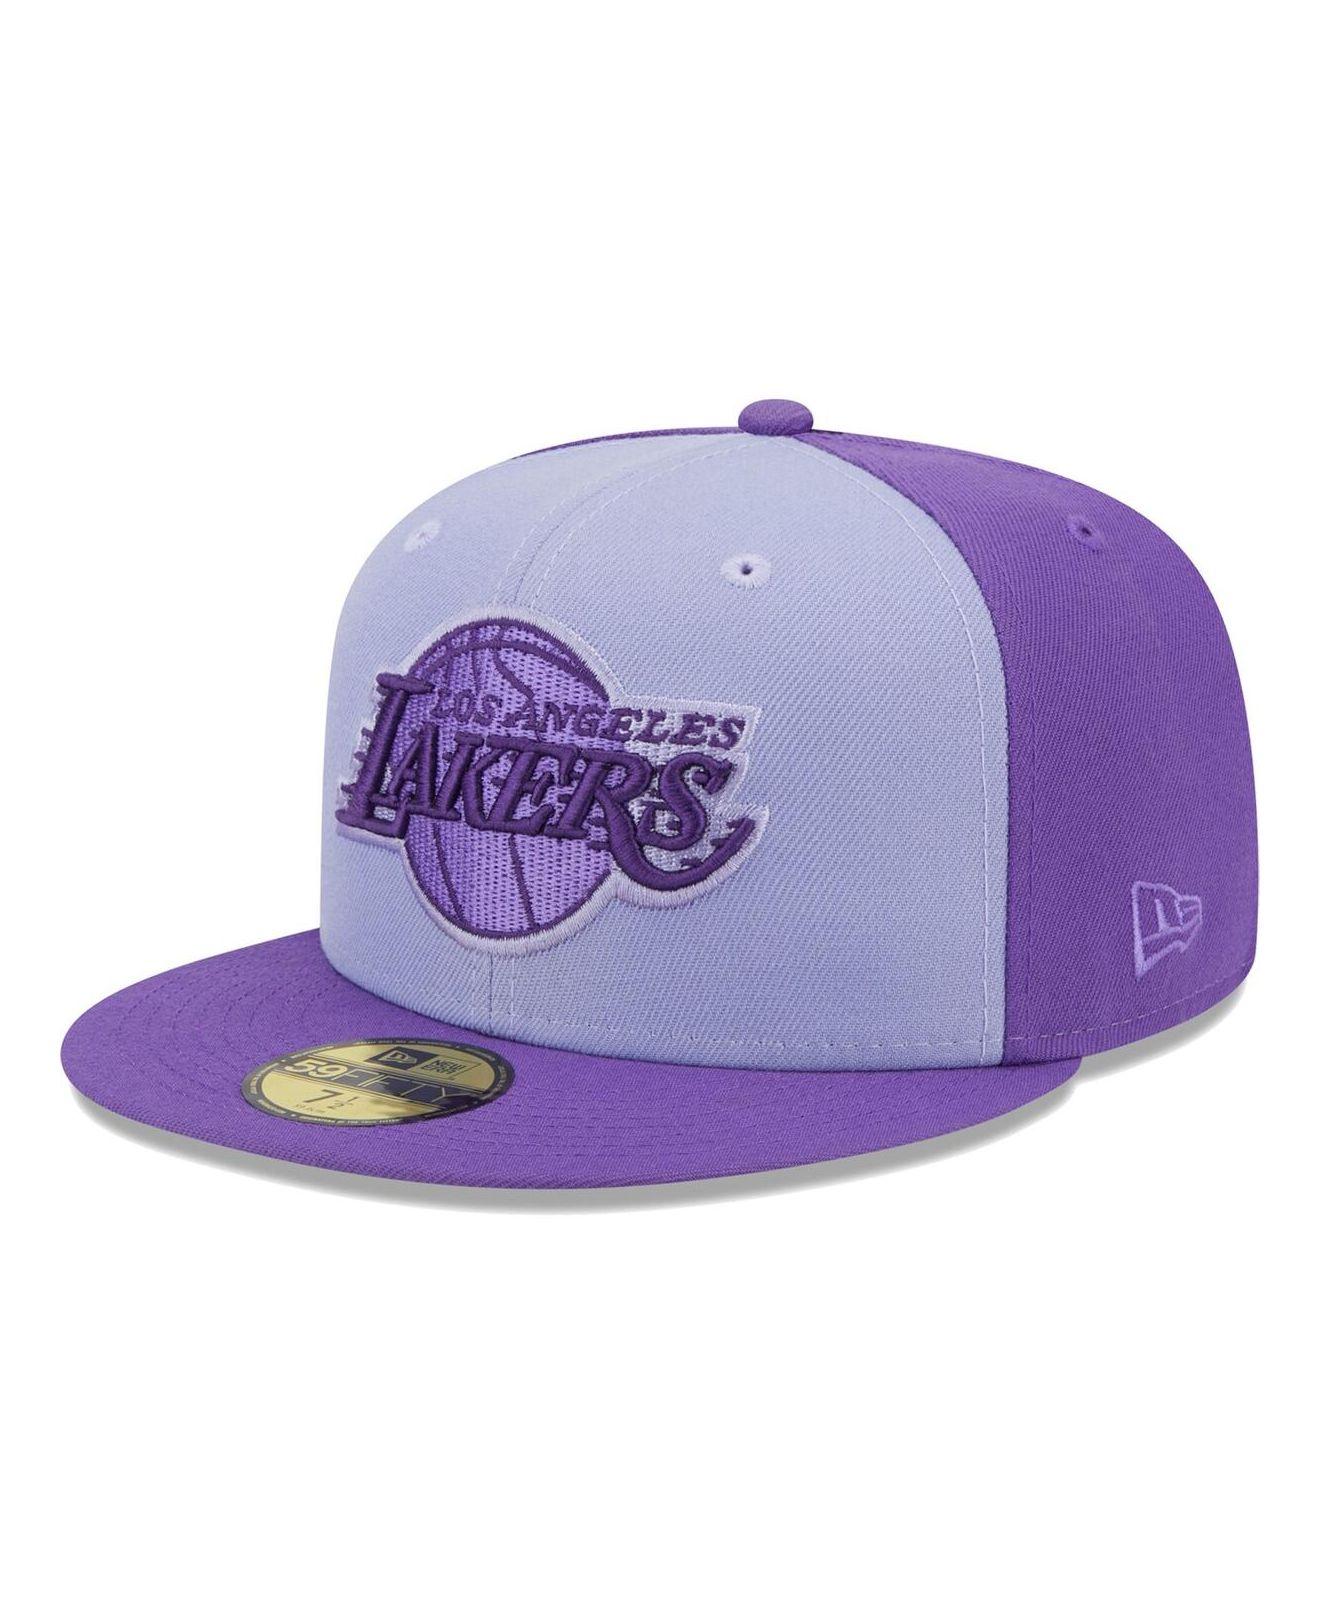 Los Angeles Lakers New Era Two-Tone 59FIFTY Fitted Hat - Light Blue/Brown